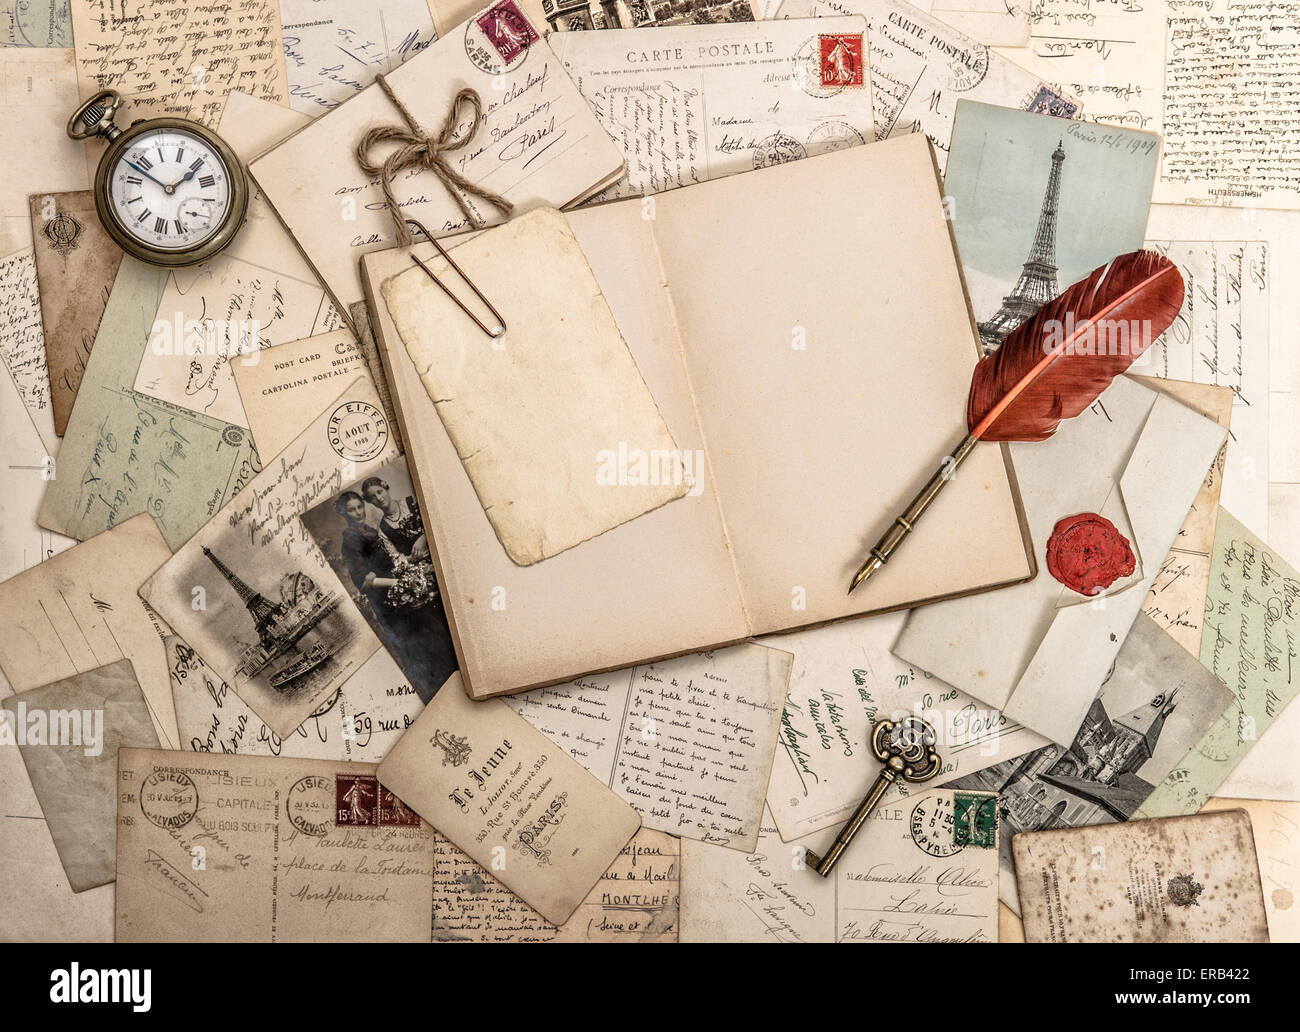 Open diary book, old accessories and postcards. Sentimental vintage style background Stock Photo